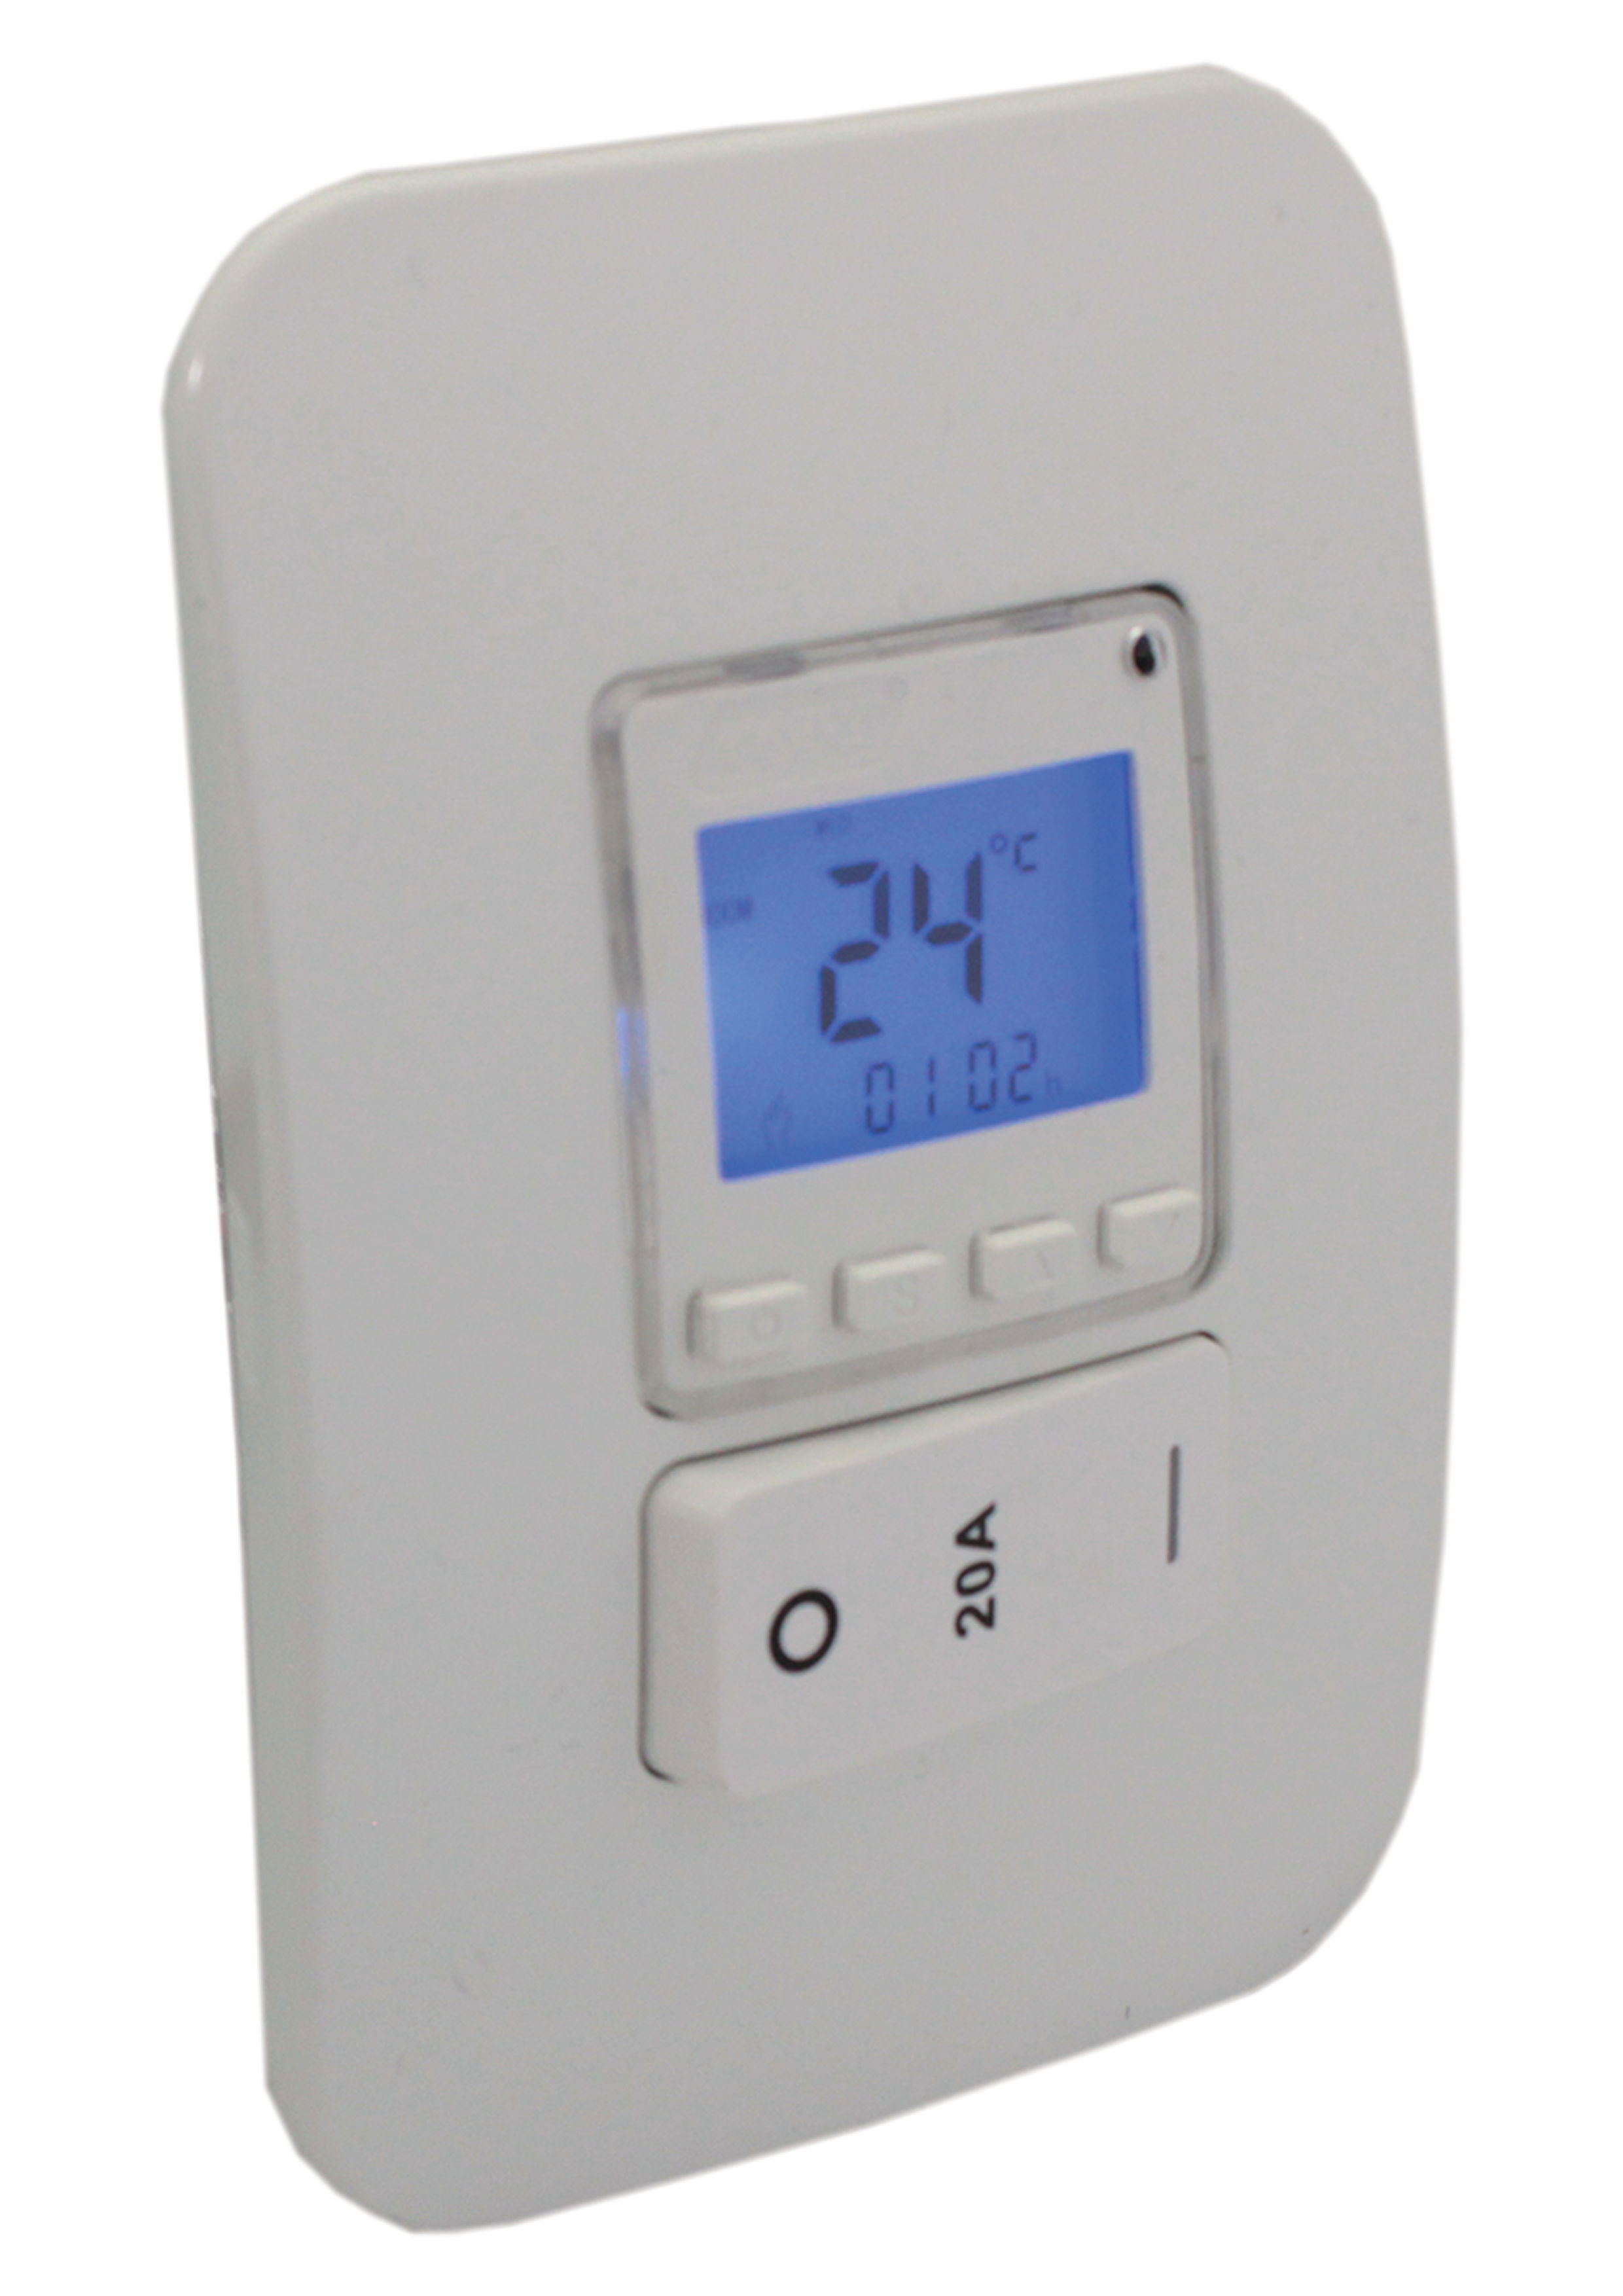 Digital Thermostat with Isolator Switch (V402DTWC) - VETi